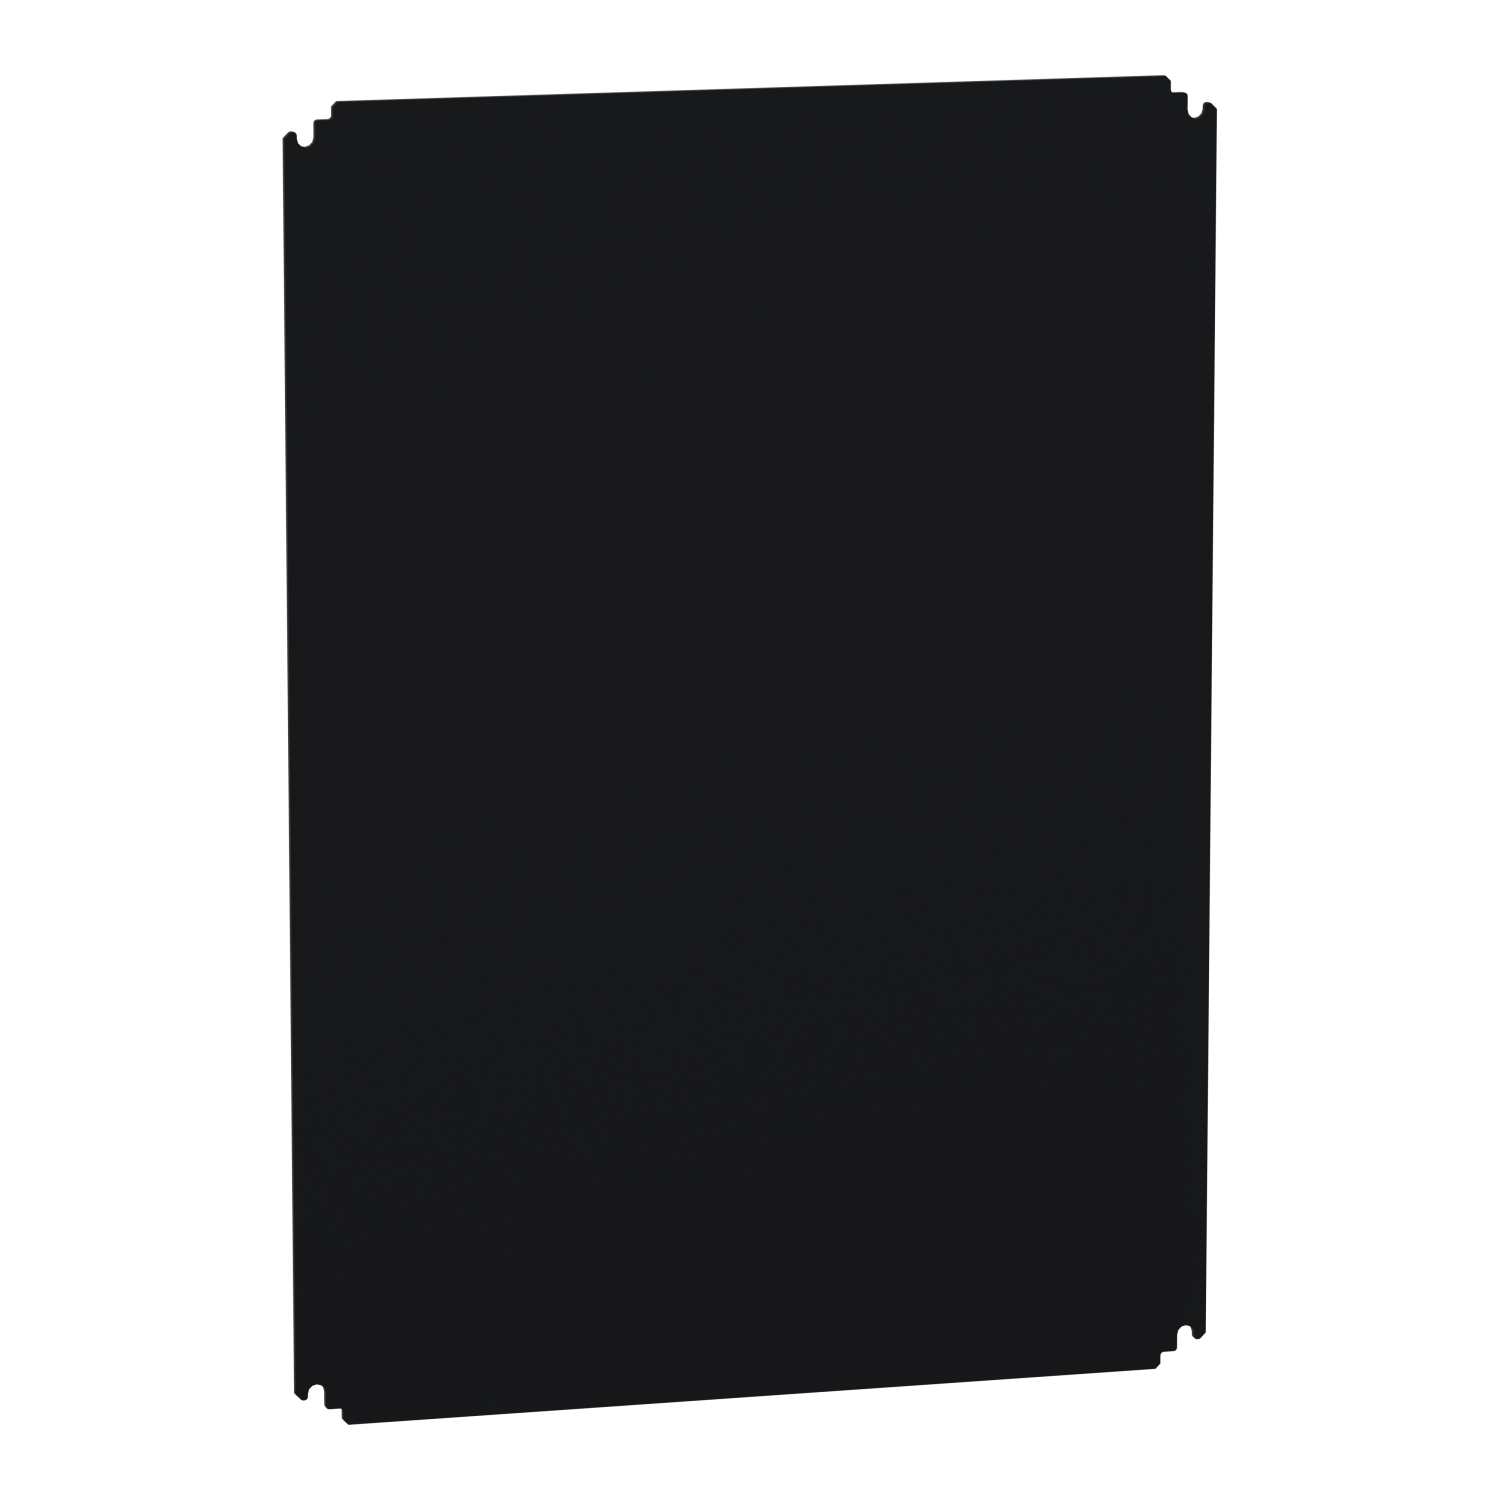 Insulating mounting plate for enclosure H800xW600mm made of bakelite